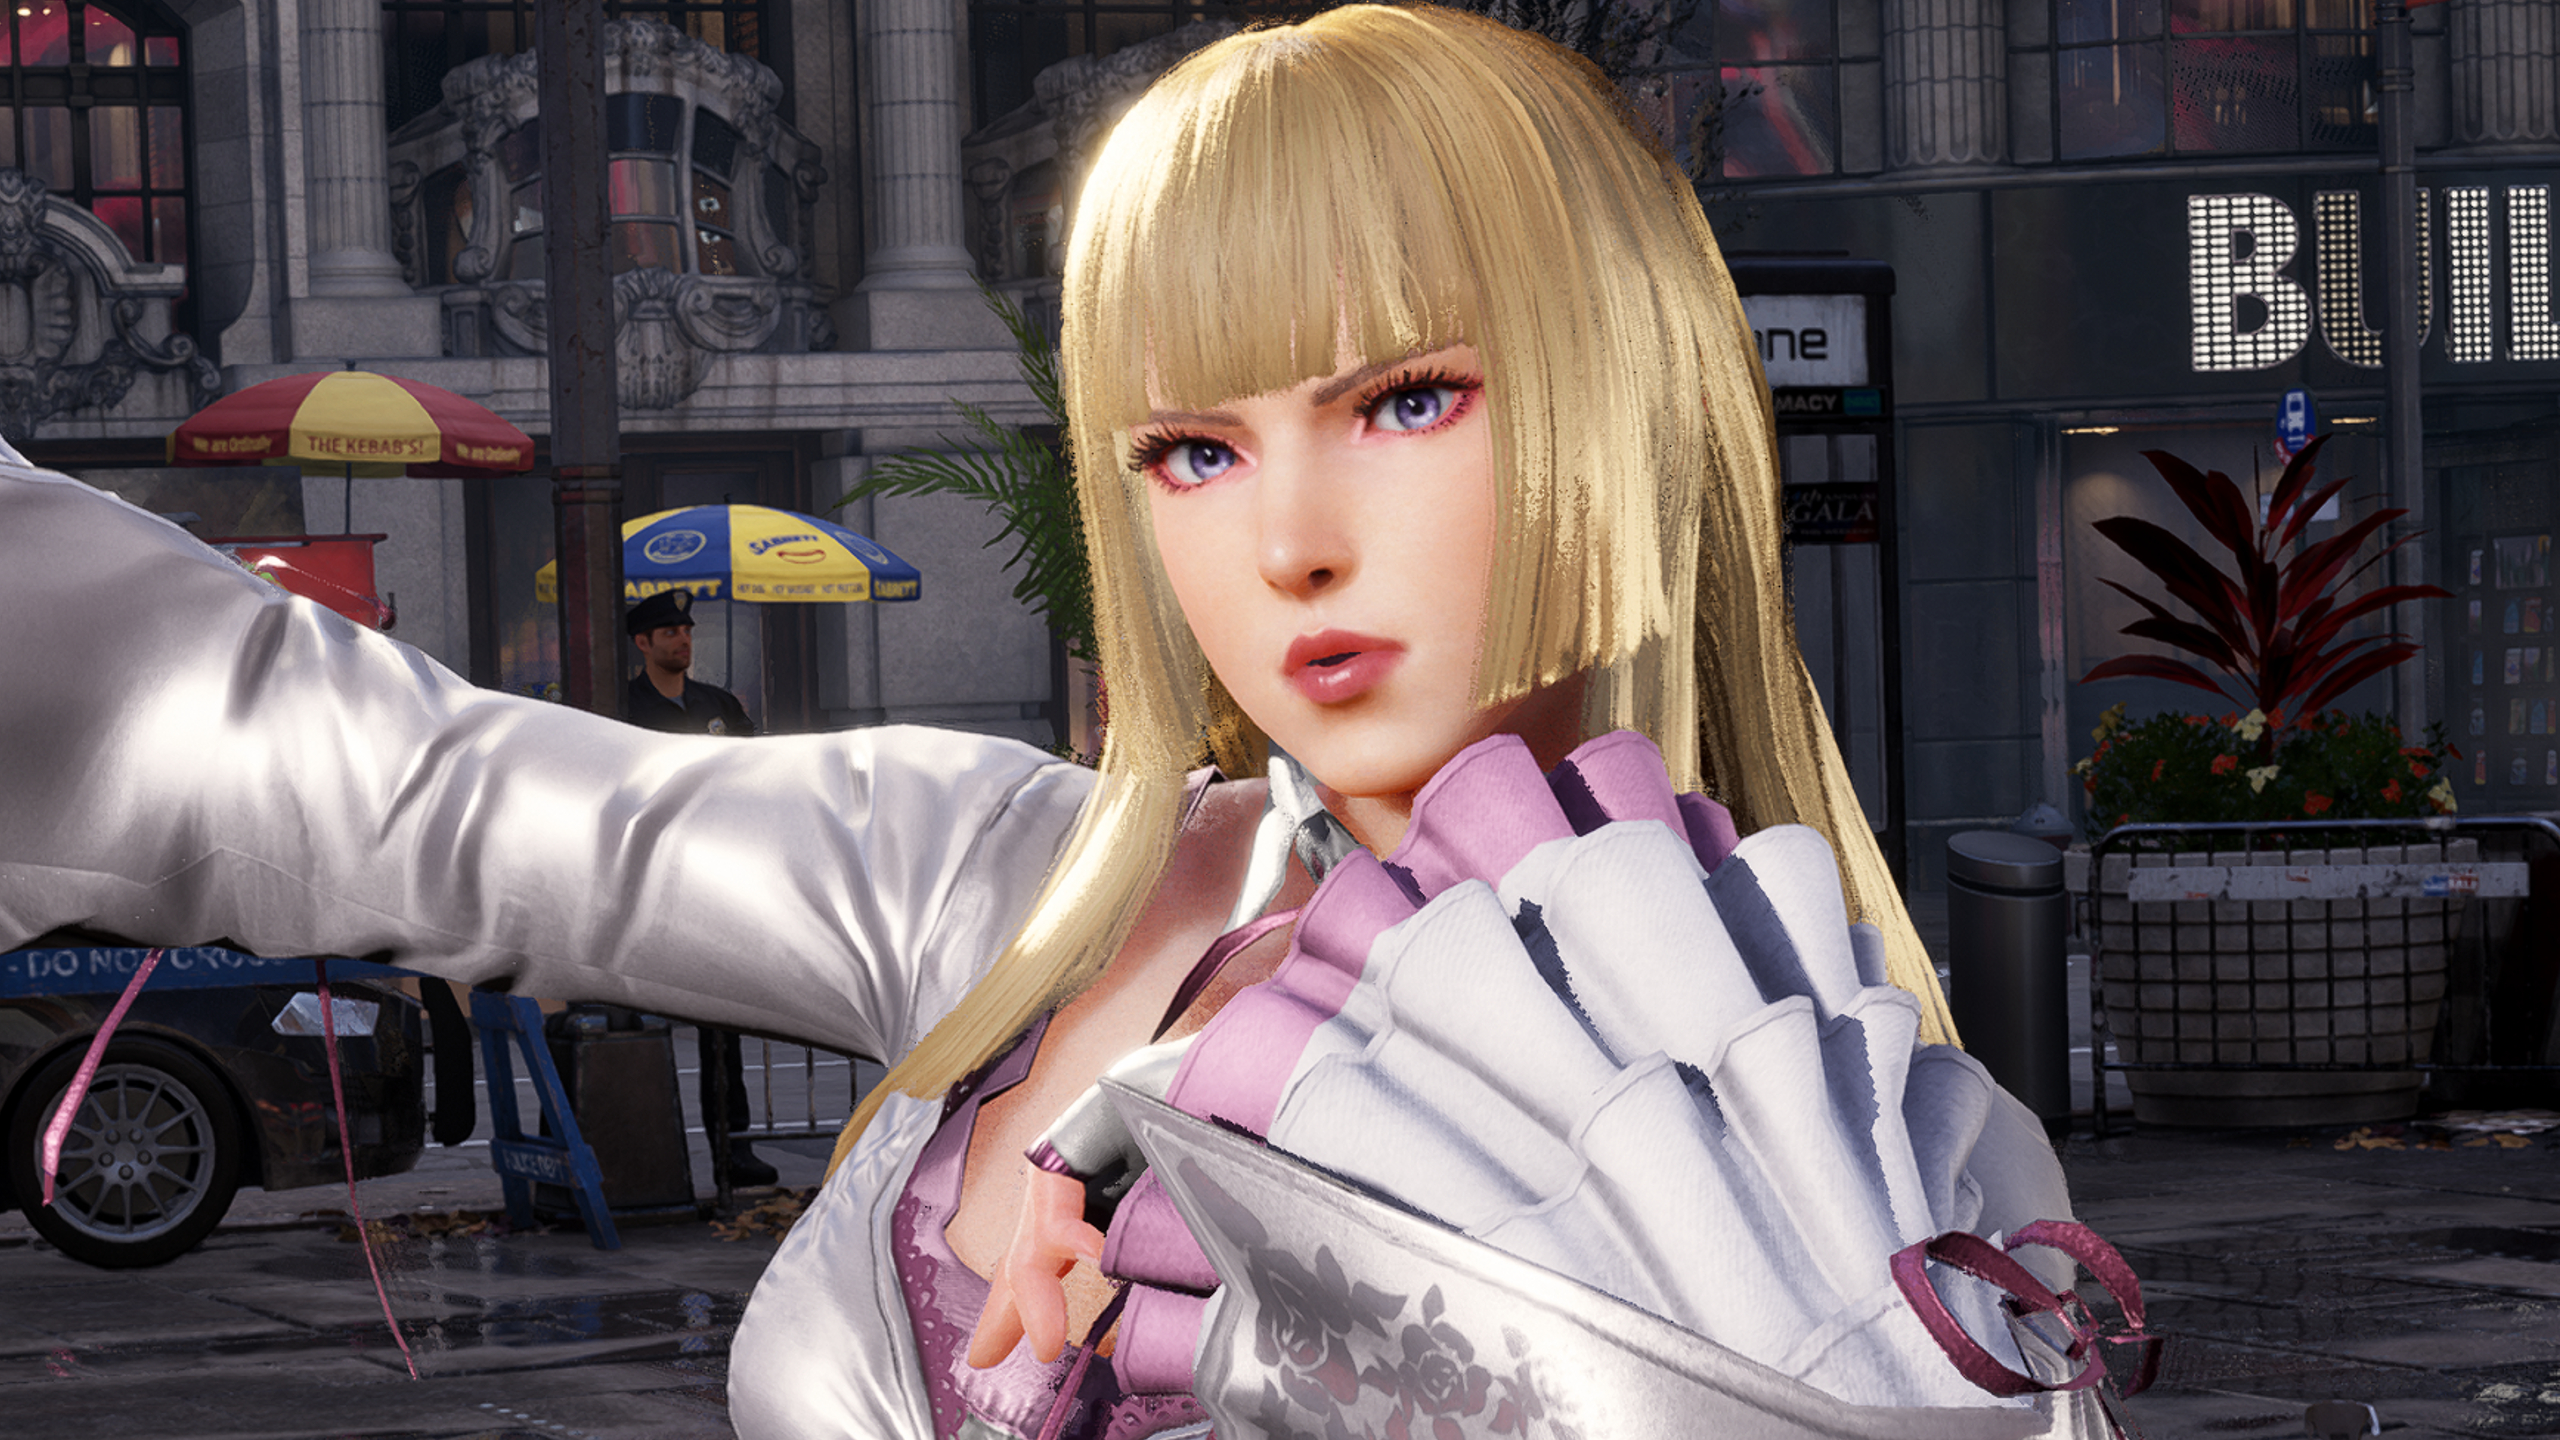 Tekken 8’s newest cash shop skin commits the cardinal sin of forgetting Lili’s skirt lace, Harada reassures fans he’ll ‘request a fix from the costume team’ for his wrongdoings